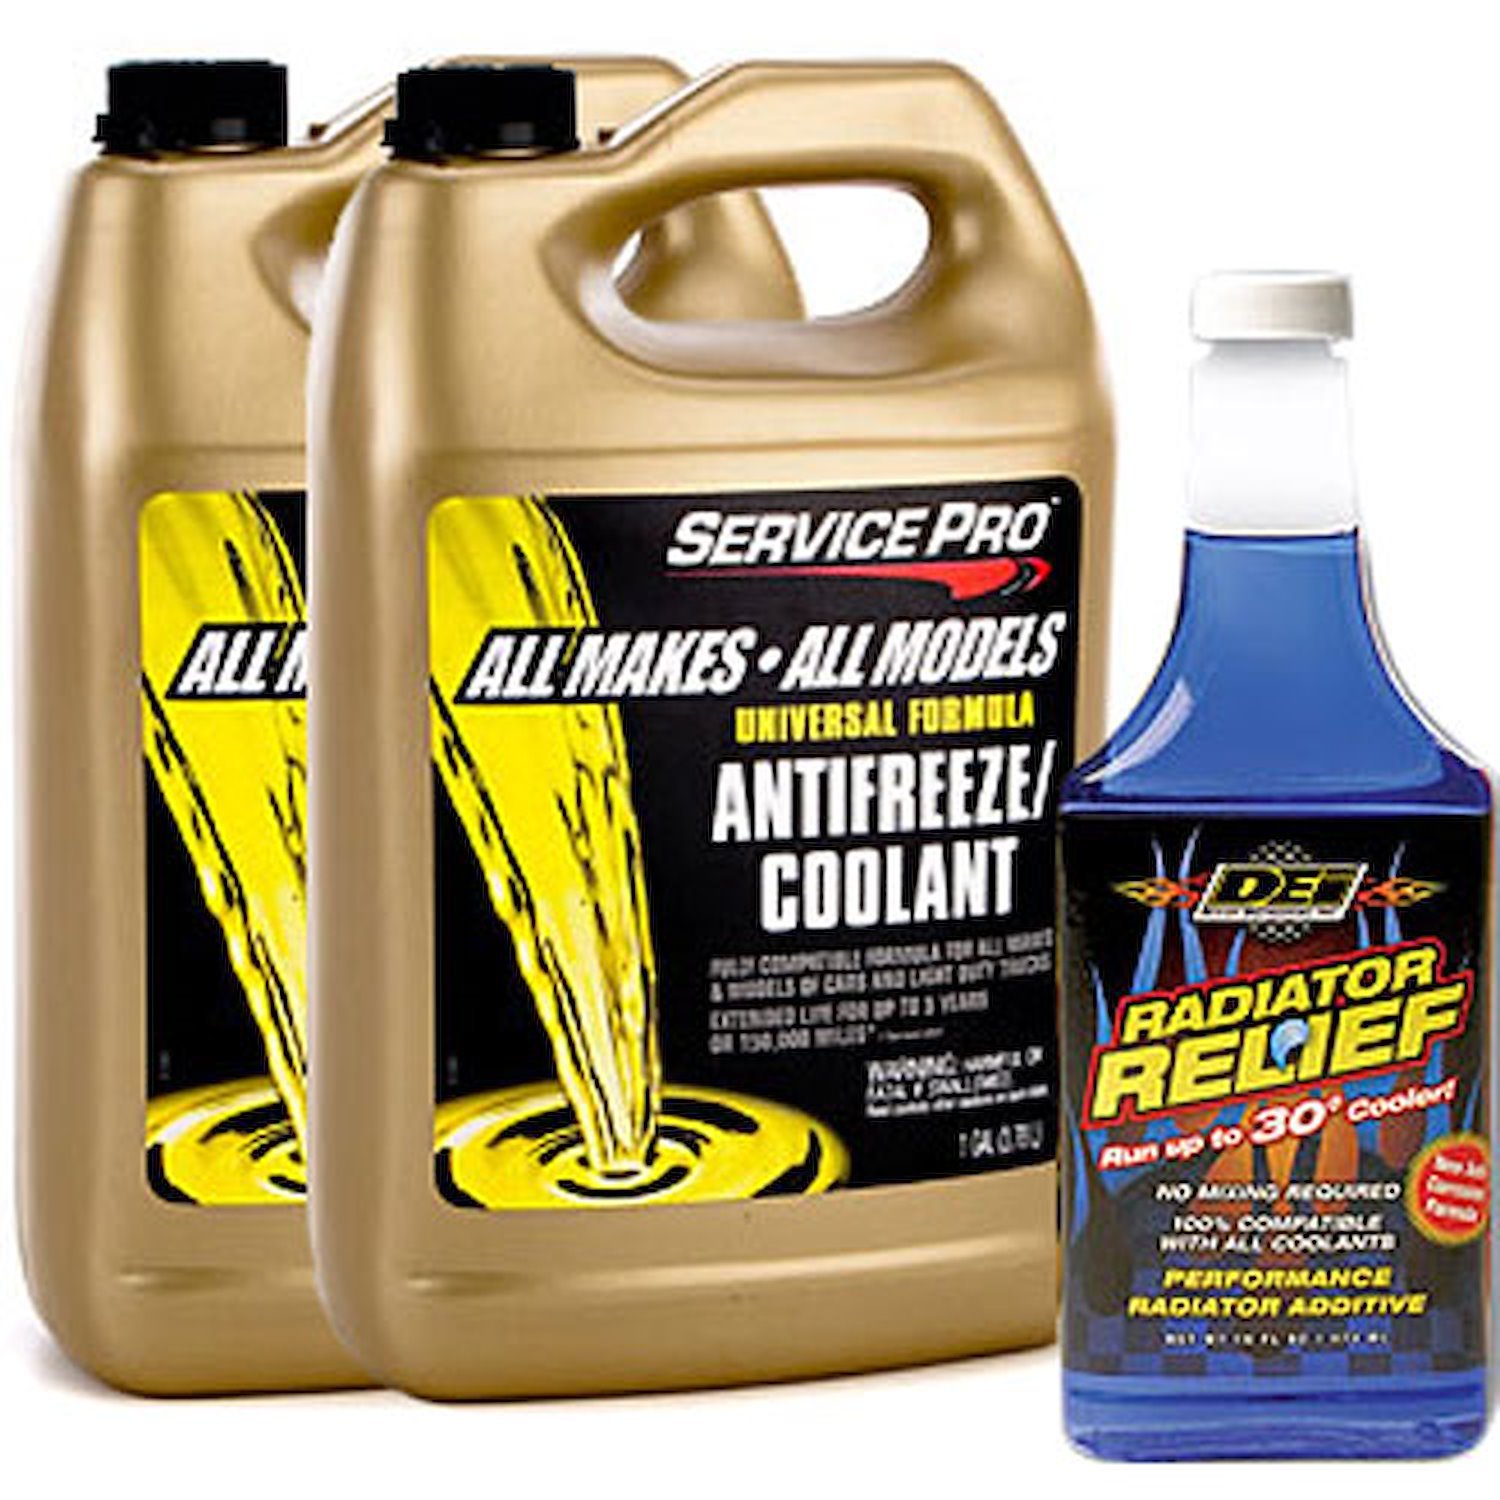 Cooling System Summer Heat Kit Includes: (1) 16oz Bottle DEI Radiator Relief